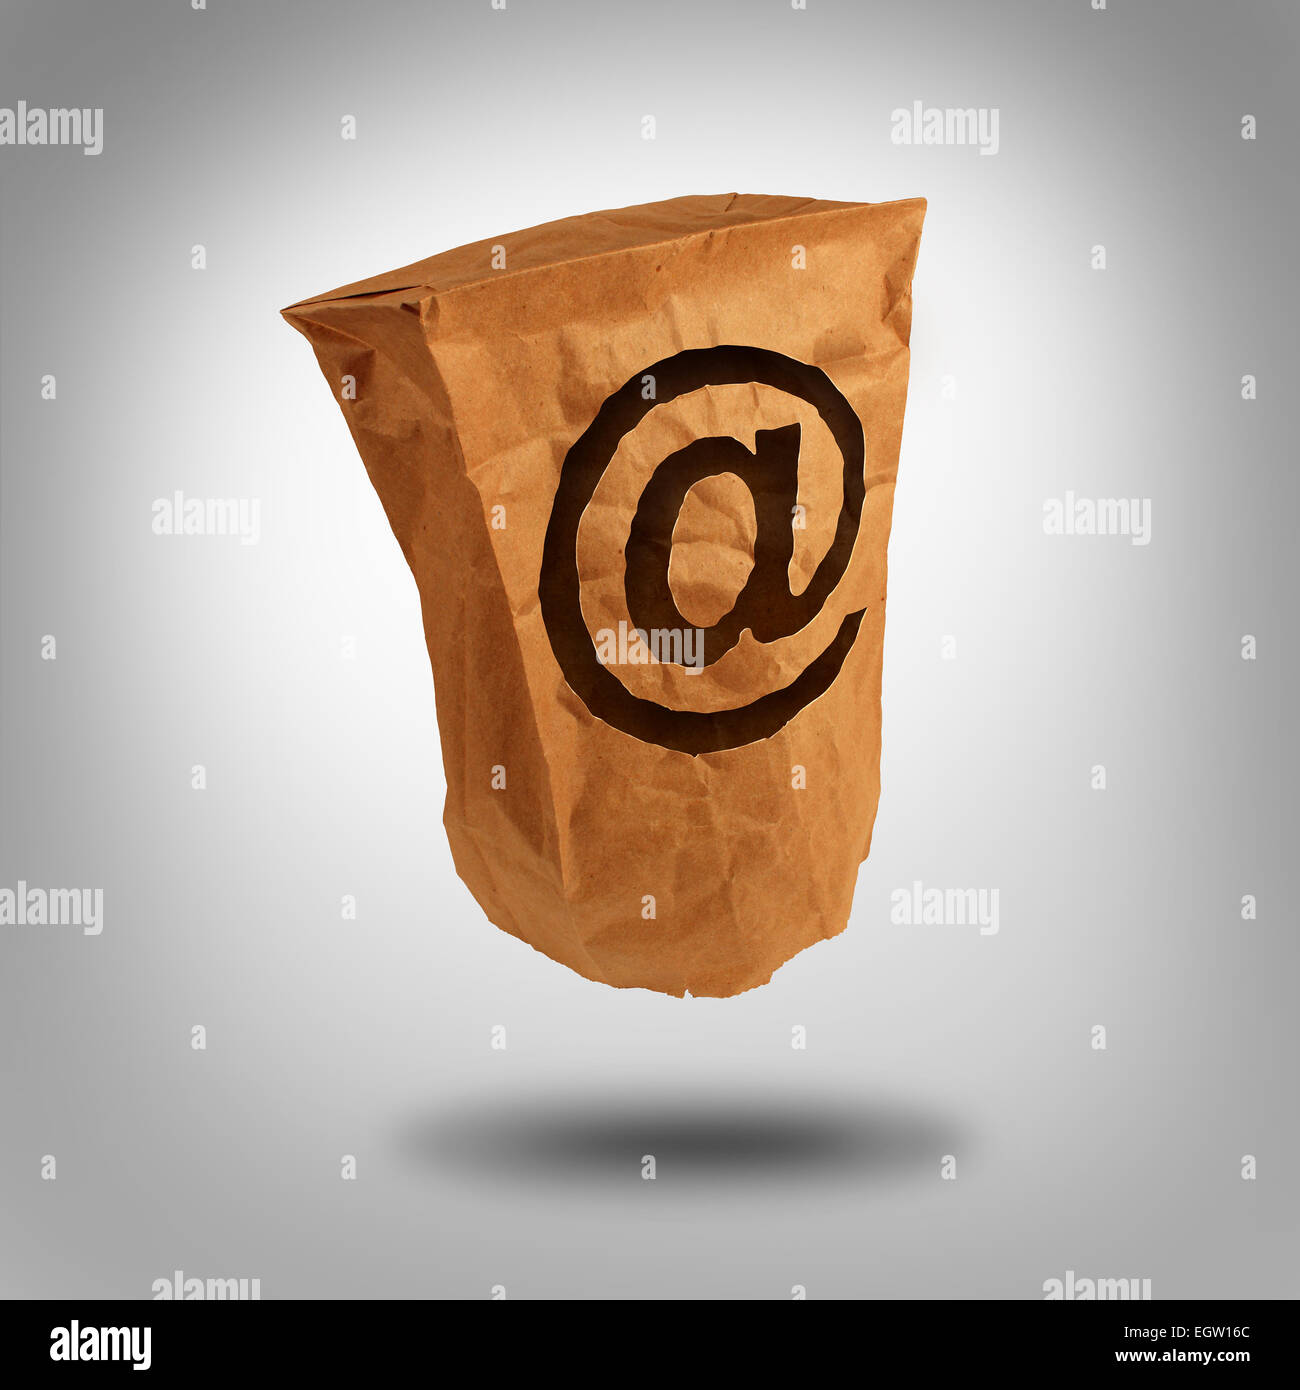 Digital identity and private or anonymous social network user on the internet as a brown paper bag with a hole shaped as the email symbol with an ampersand icon. Stock Photo